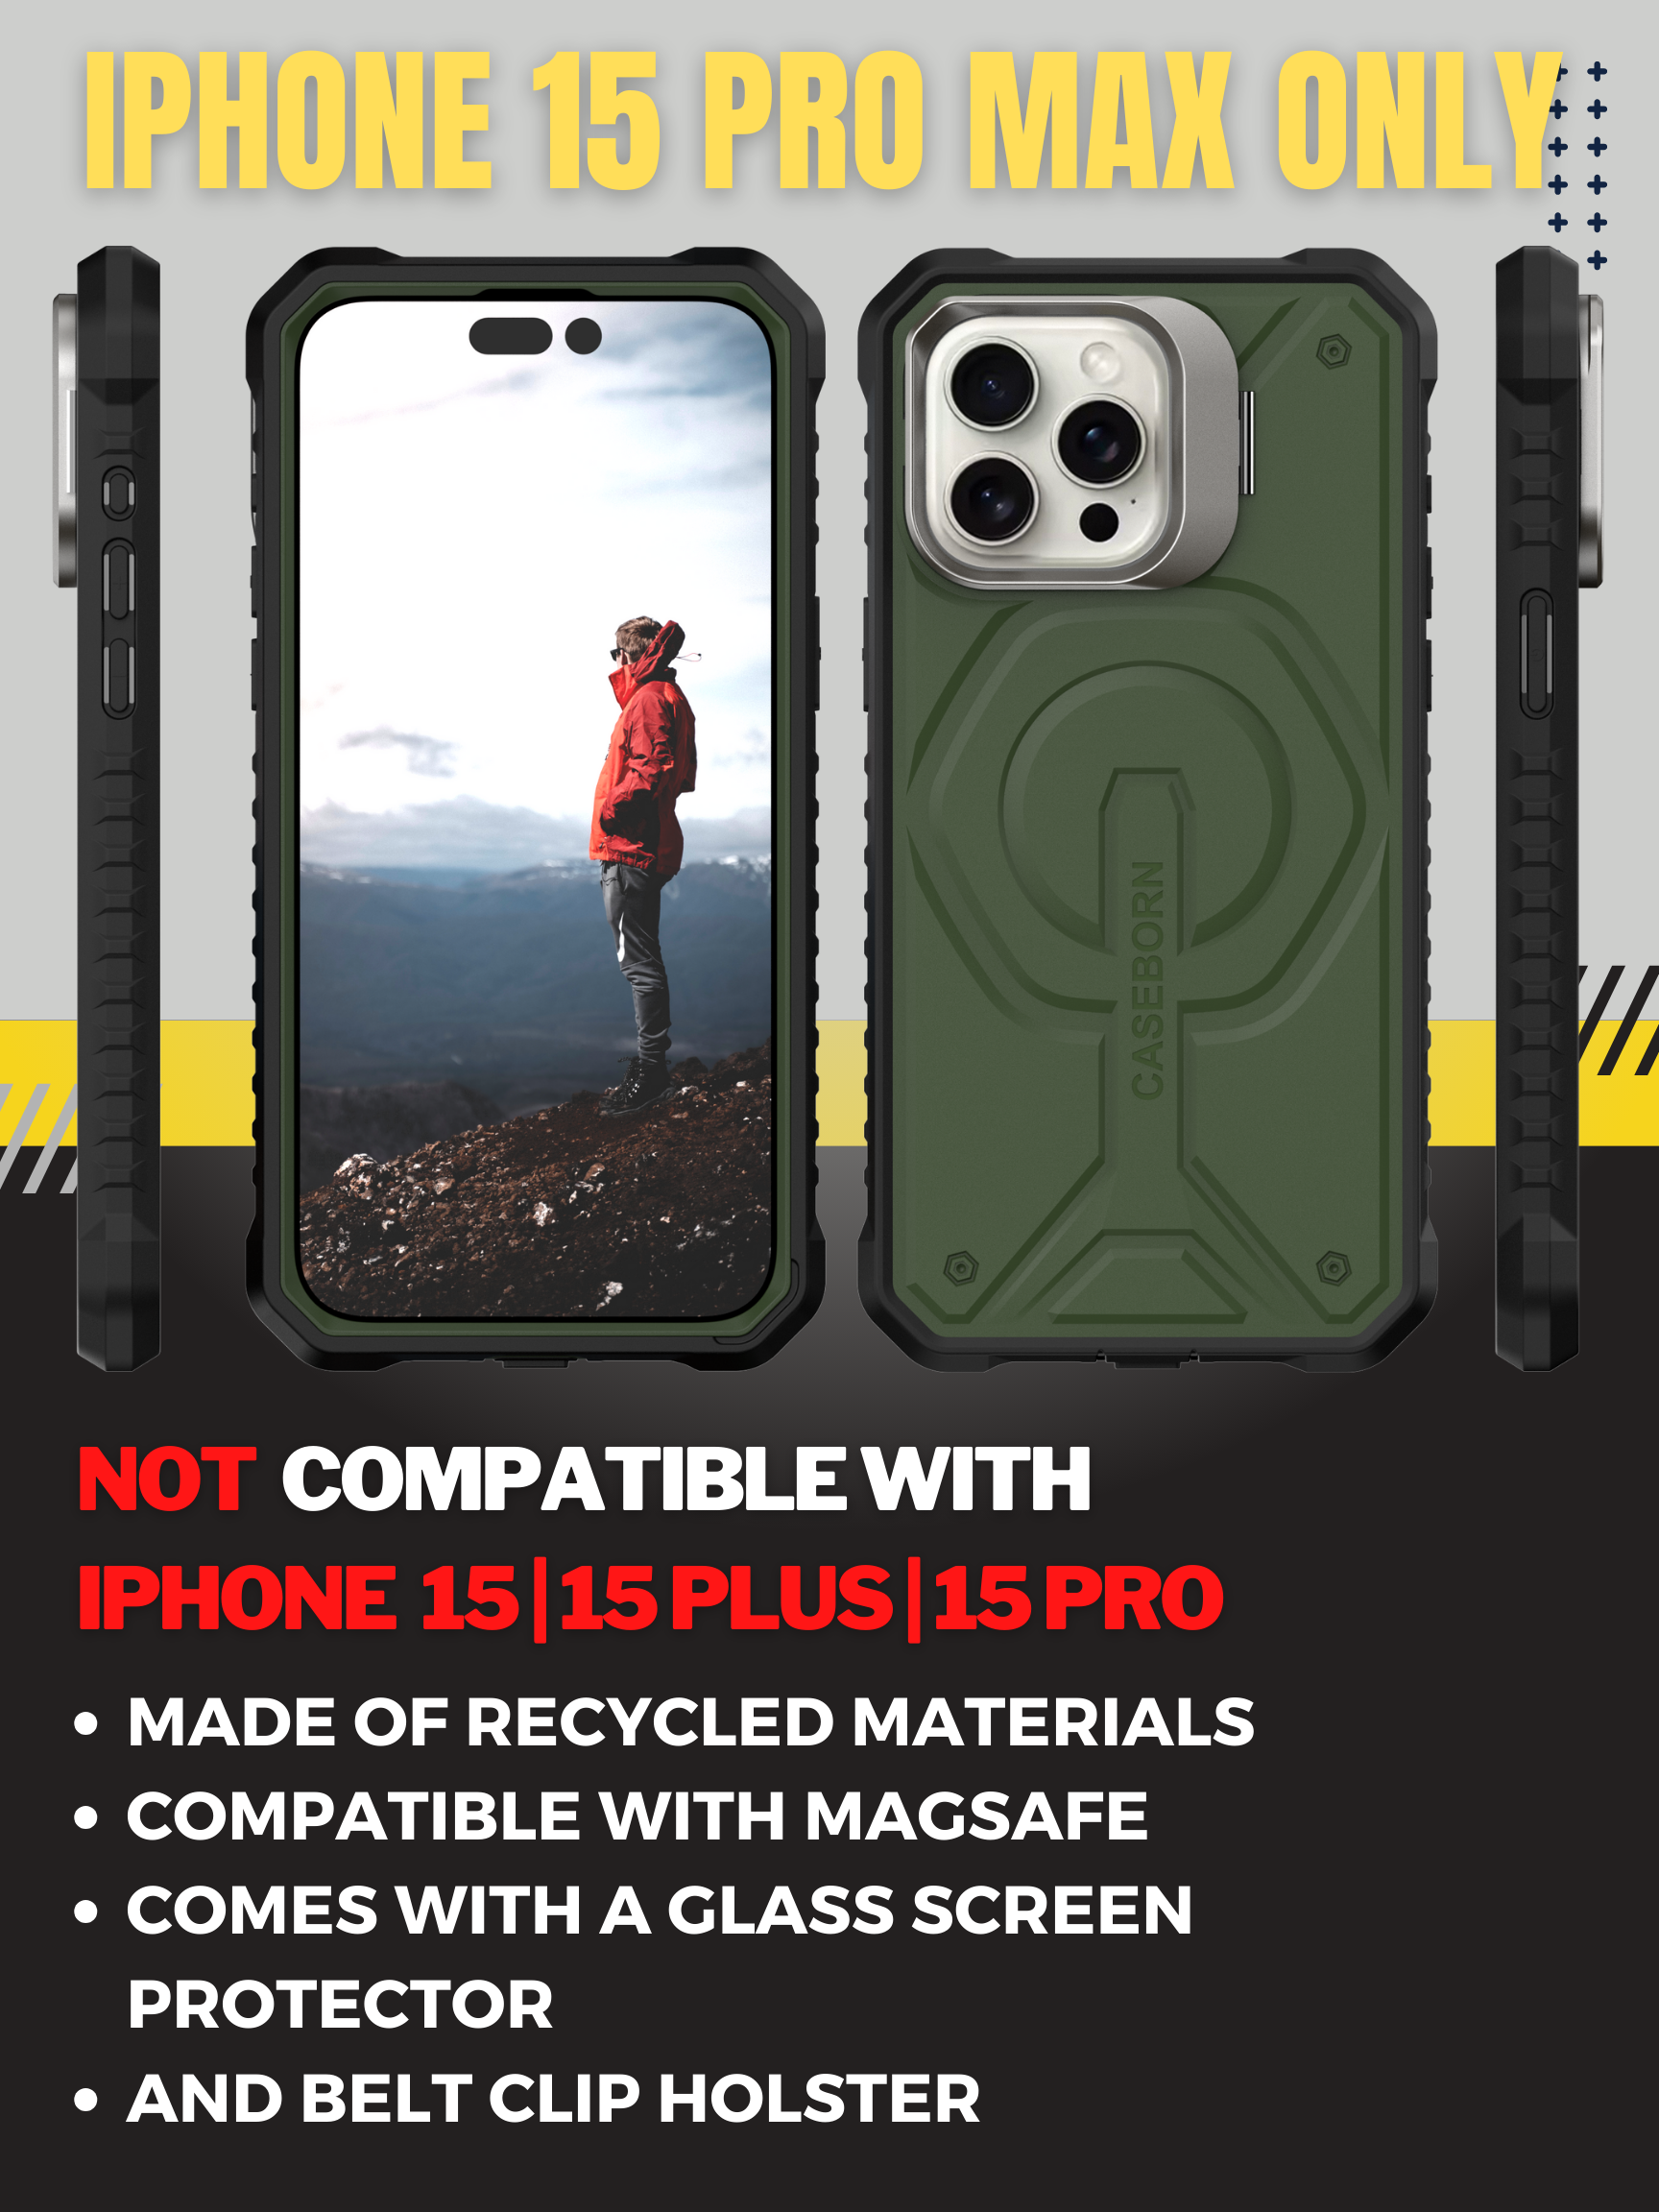 iPhone 15 Pro Max Case - Military Grade Protection - MagSafe Compatible - with Belt Clip Holster, Kickstand & Tempered Glass Screen Protector